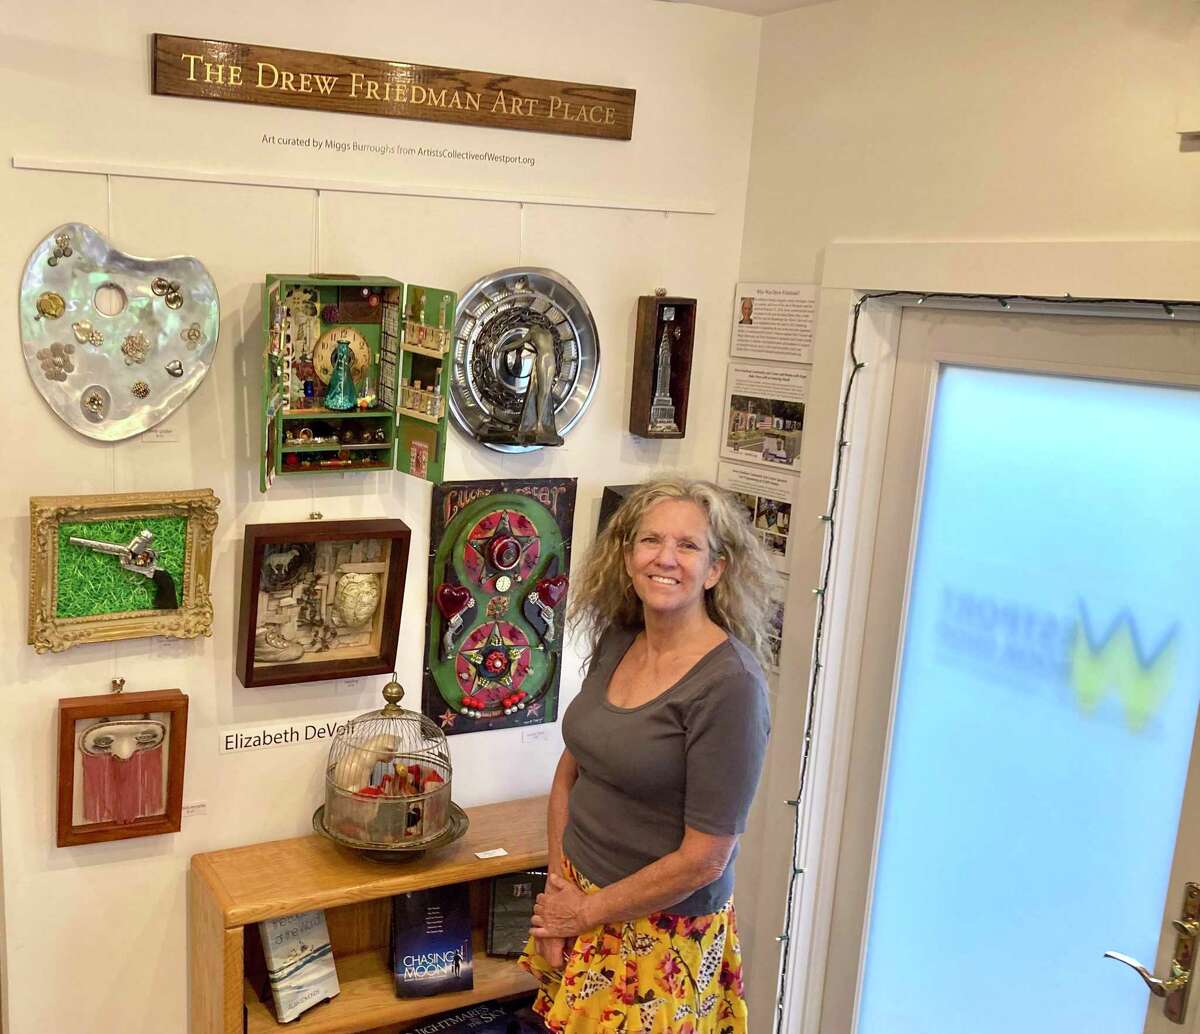 Artist Elizabeth Petrie-Devoll is the Westport Book Shop’s guest exhibitor in an August art exhibit at the shop’s Drew Friedman Art Place for the current month. Petrie-Devoll is exhibiting 11 original assemblage works of art through Aug. 31, with all of the artwork being available for purchase.